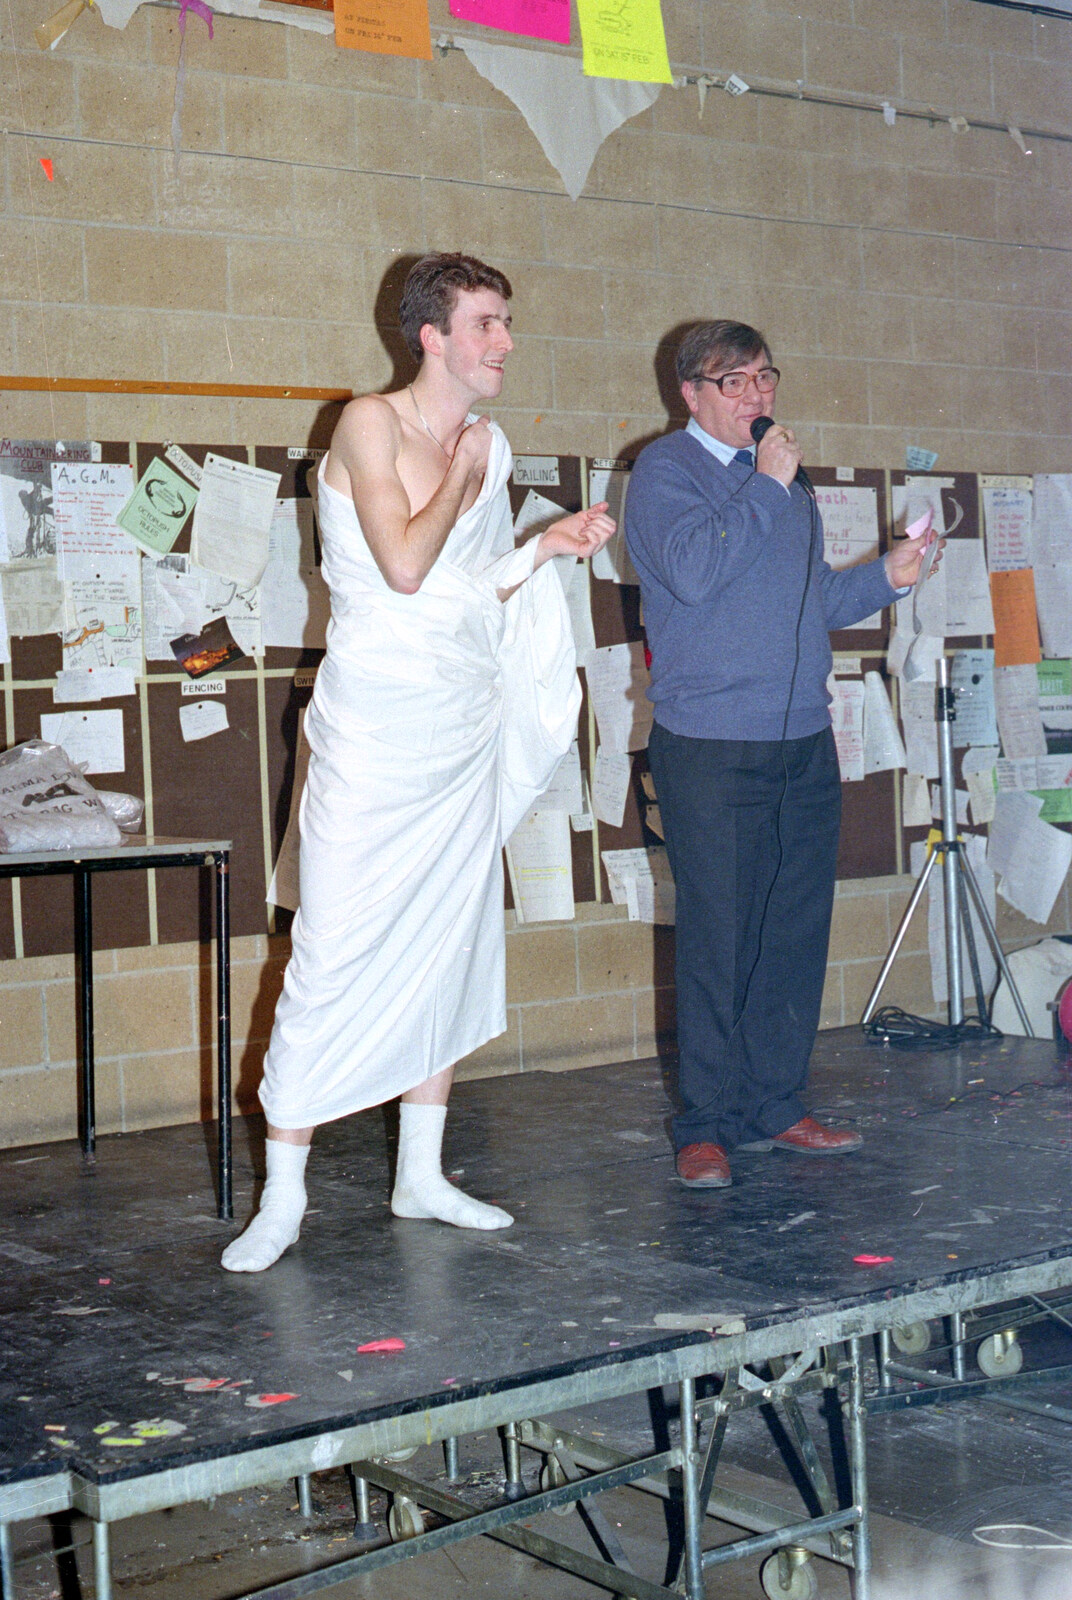 Roy auctions off another toga from Uni: The PPSU "Jazz" RAG Review and Charity Auction, Plymouth, Devon - 19th February 1986